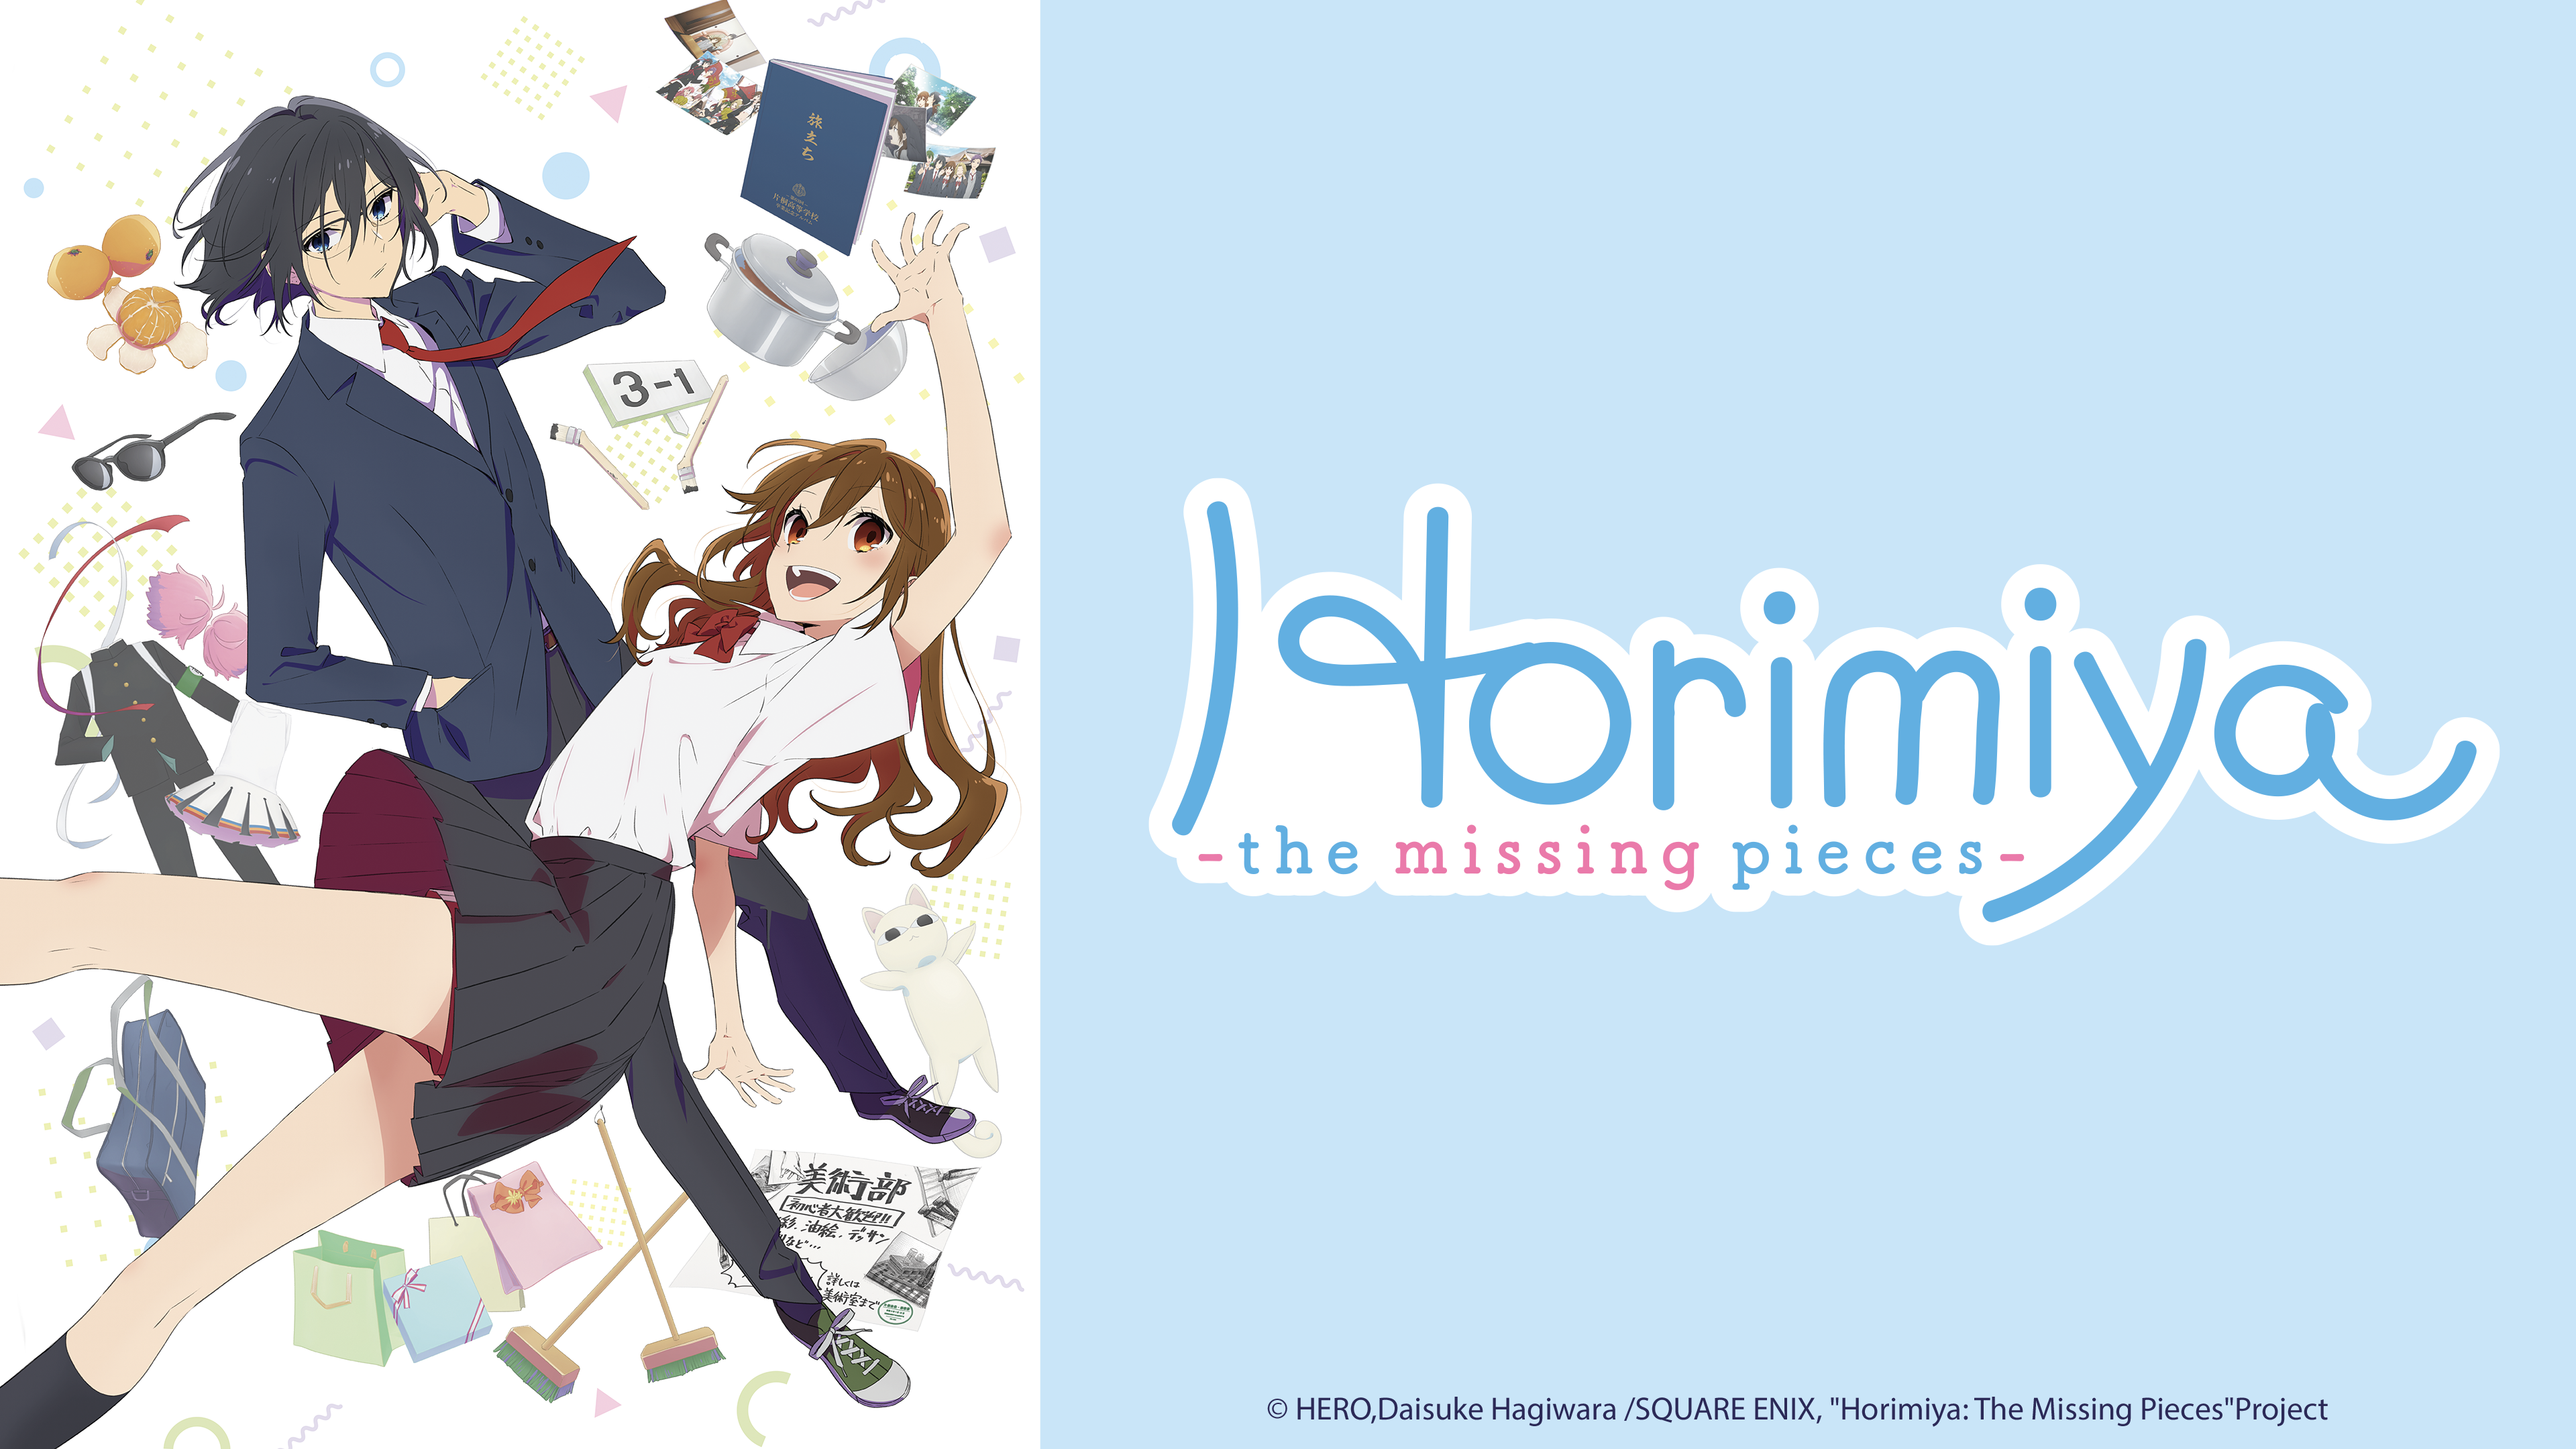 Art Credit: Horimiya_ The Missing Pieces – ©HERO,Daisuke Hagiwara -SQUARE ENIX, _Horimiya_ The Missing Pieces_Project